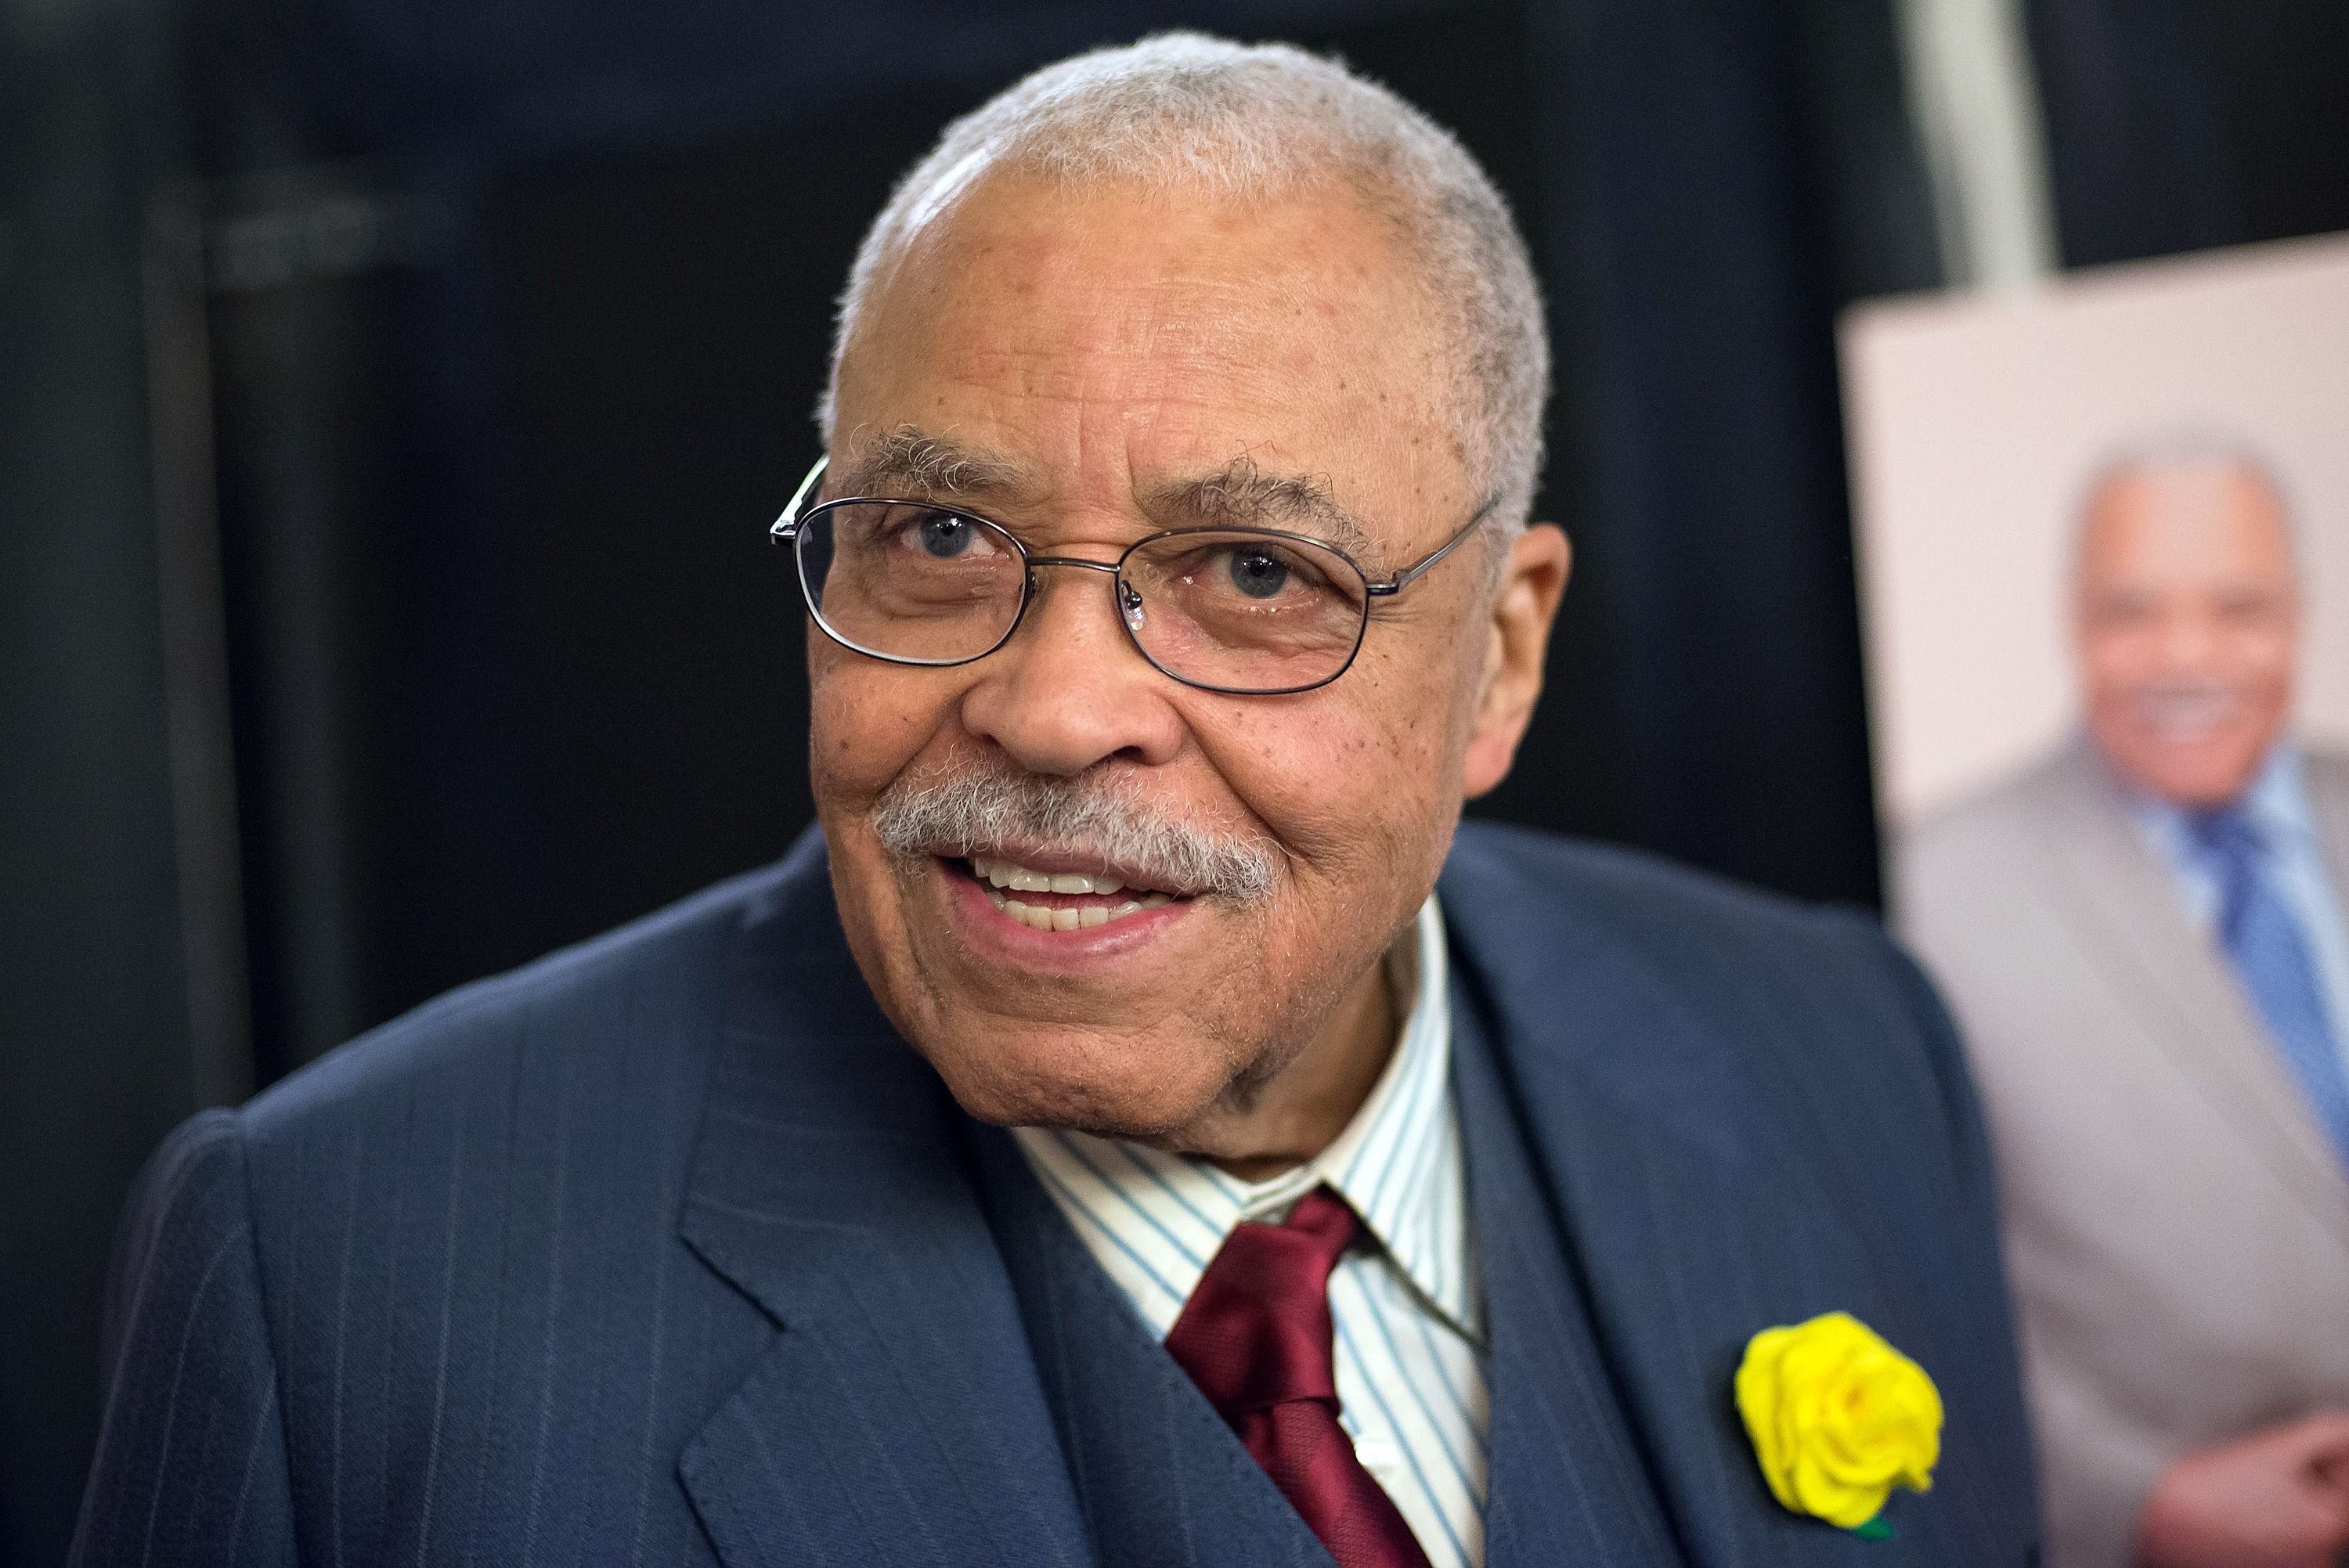 James Earl Jones at "The Gin Game" Broadway opening night after party in 2015 | Photo: Getty Images